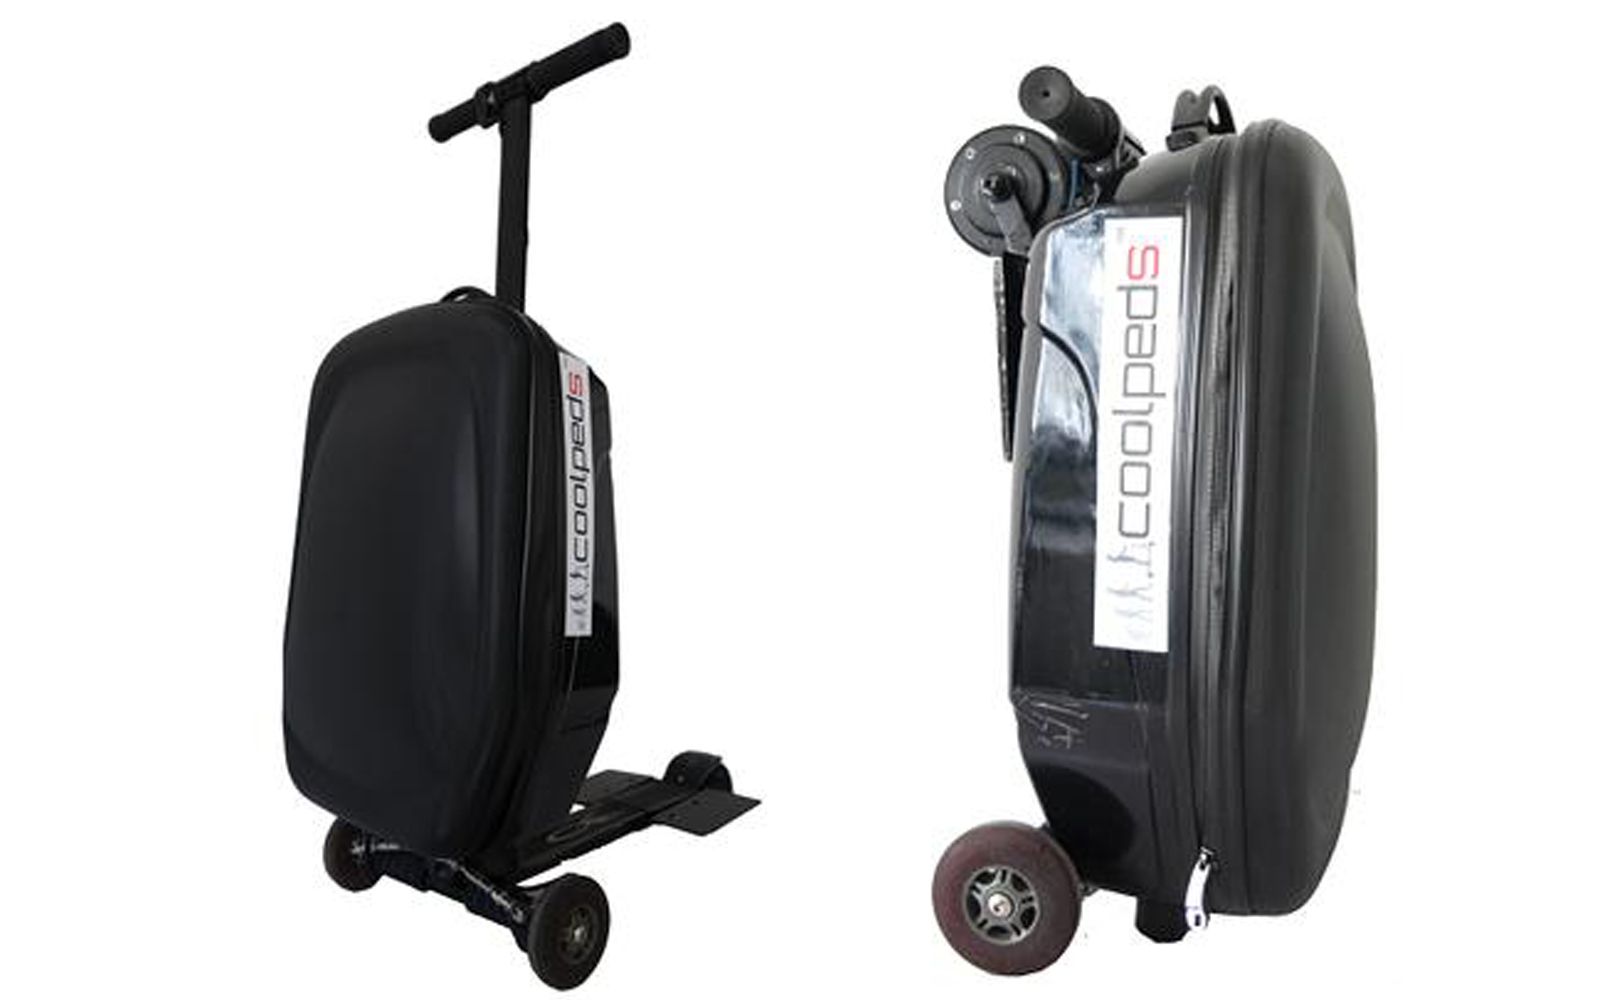 can your suitcase hit 20kph the briefcase electric scooter can image 1